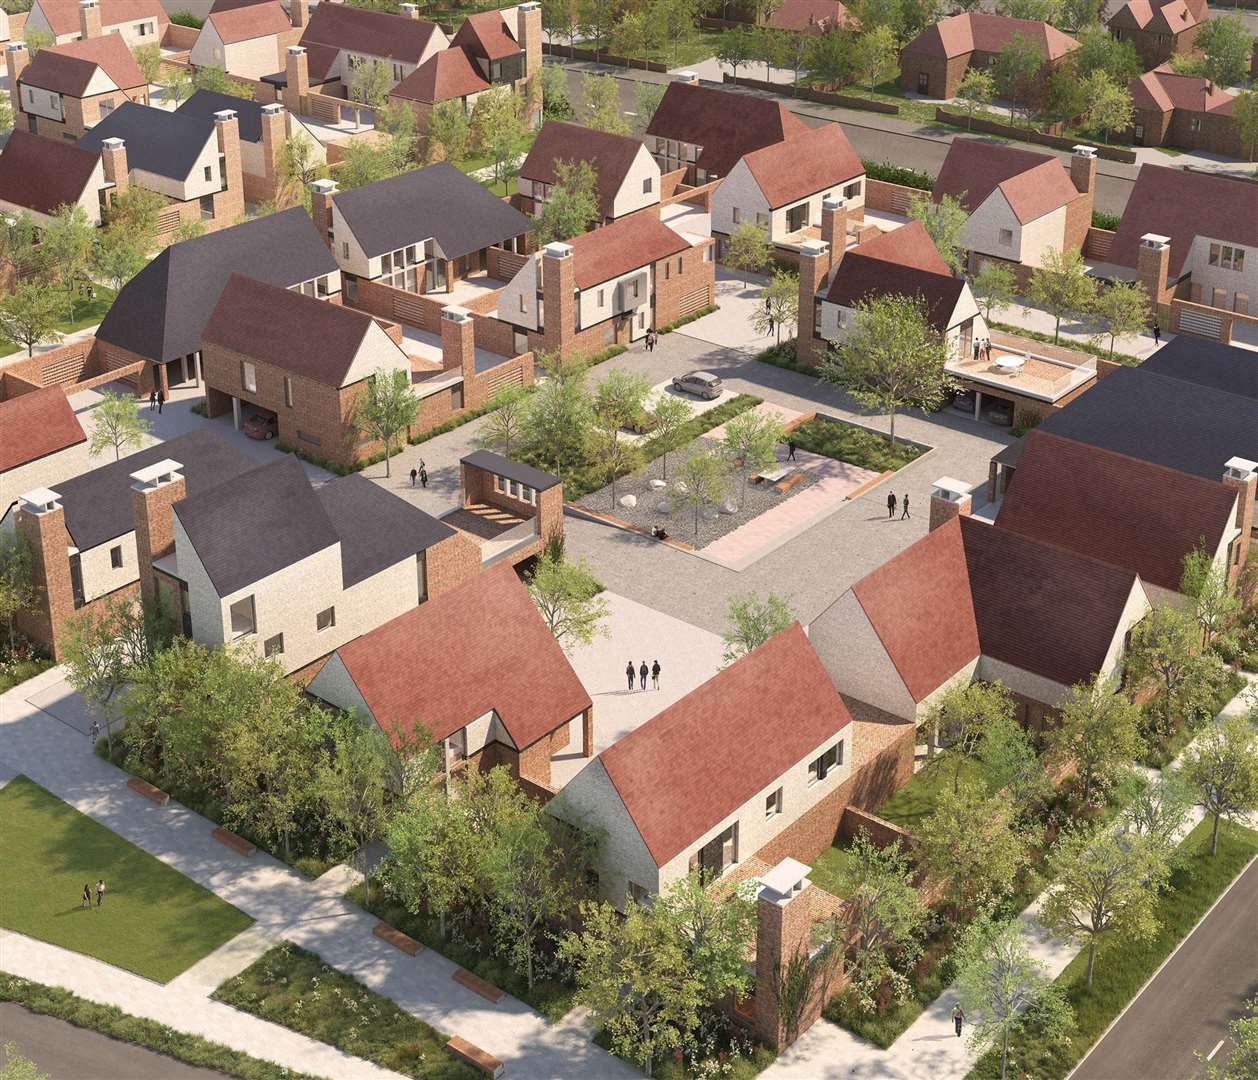 Work at the controversial Mountfield Park scheme will not begin until at least 2024. Photo: Corinthian Homes